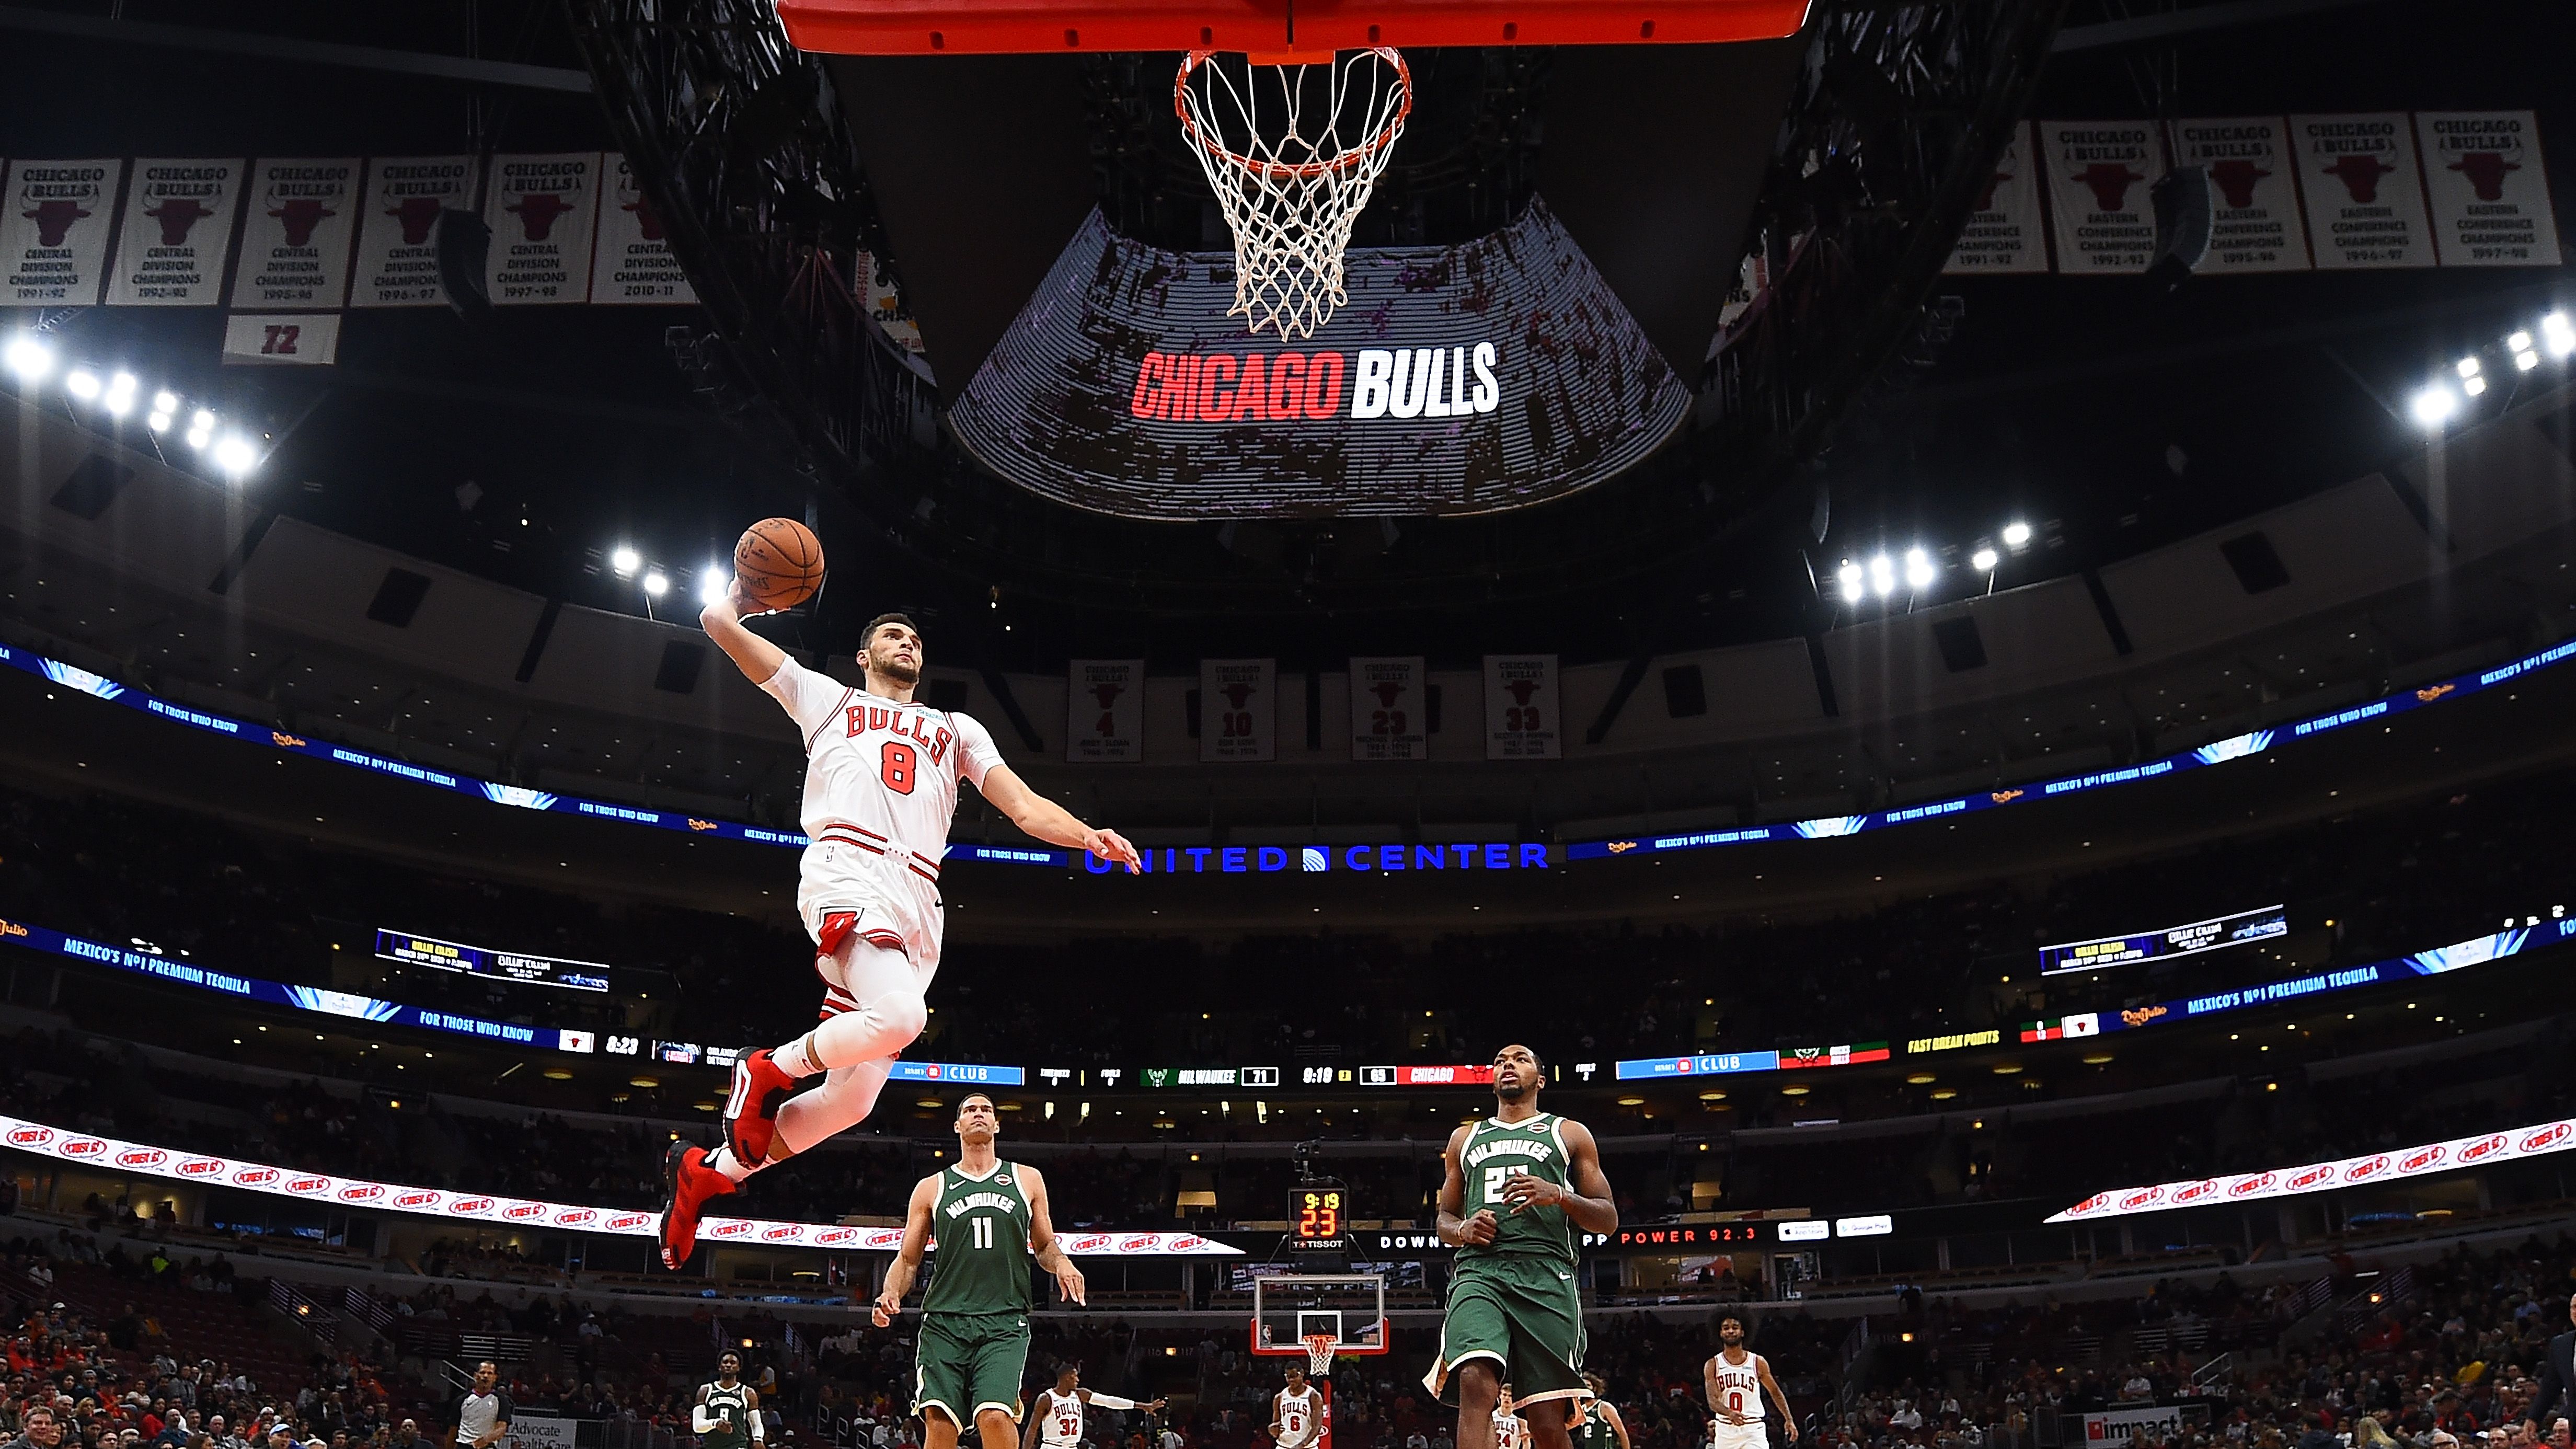 Miami Heat: Zach LaVine is the wrong Chicago Bull to target